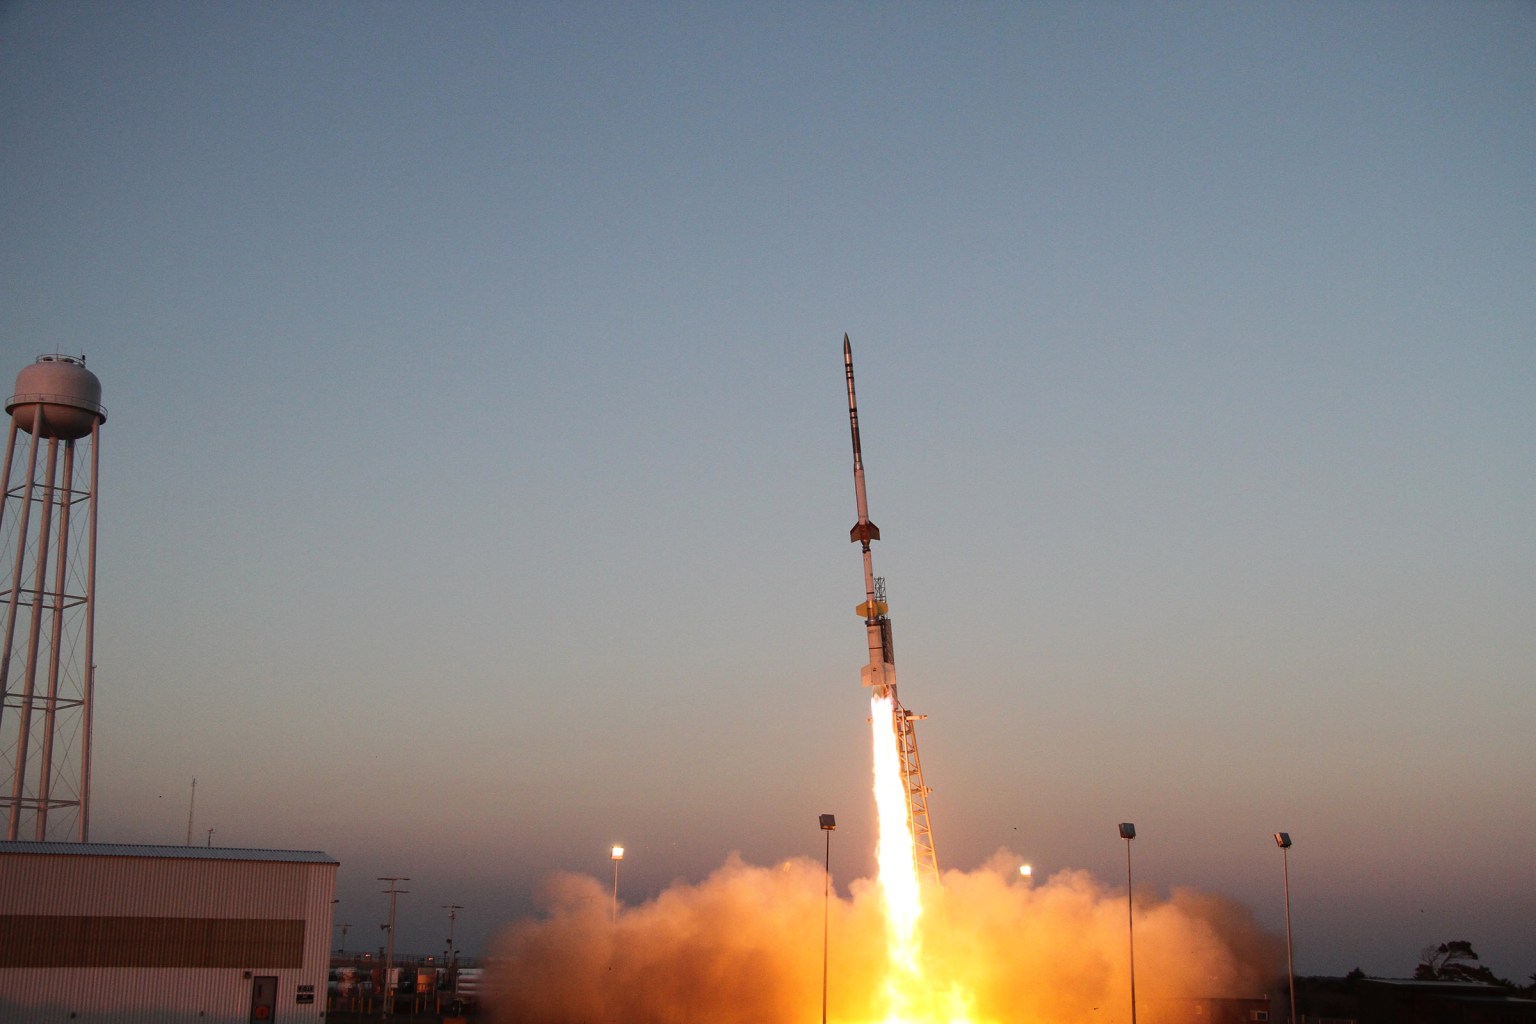 A sounding rocket seconds in mid-launch off the launch pad with a bright yellow plume underneath against a pale blue sky.